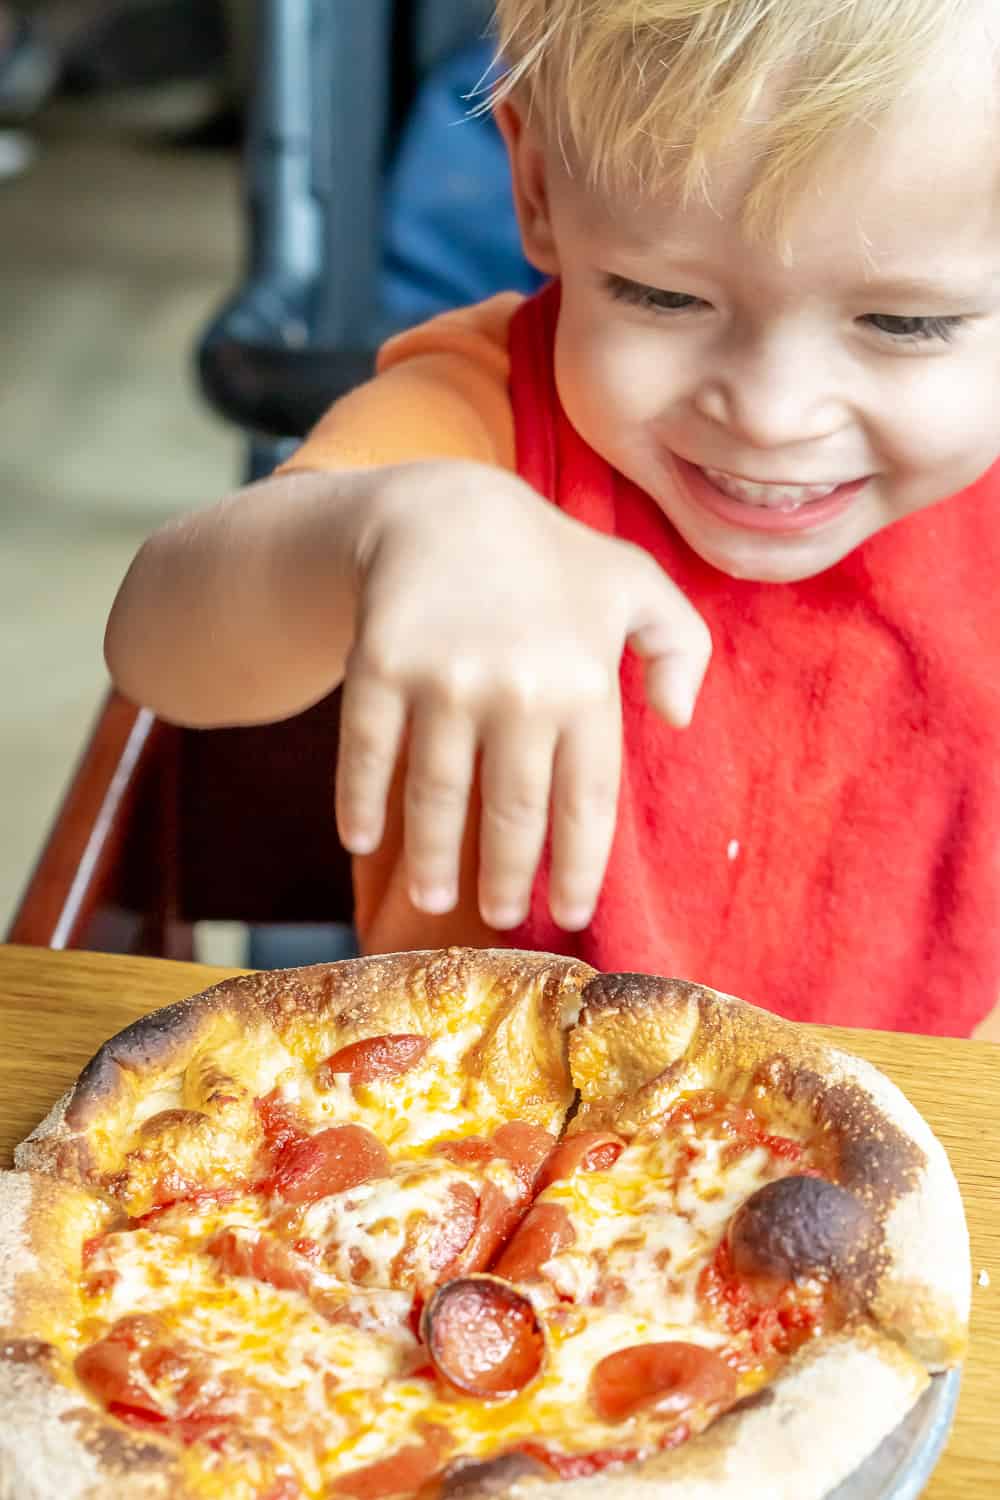 build your own pizza from the kids menu